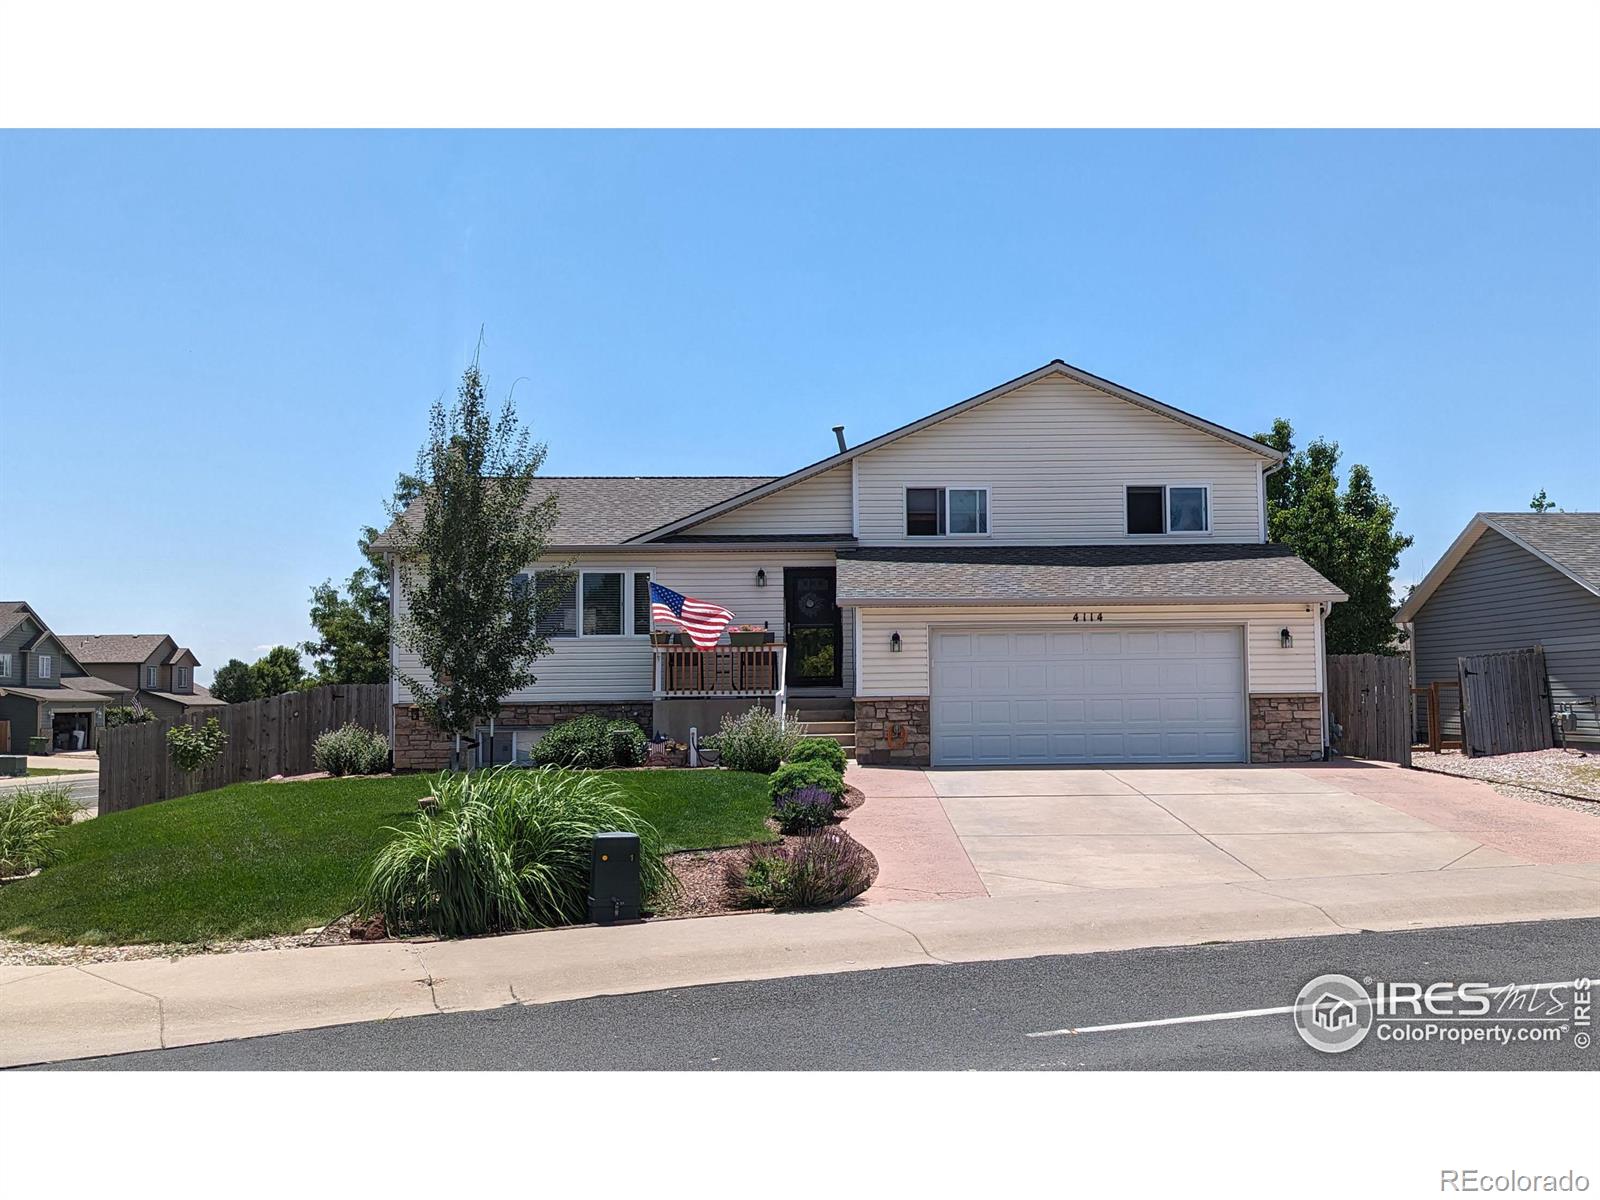 4114 W 30th St Rd, greeley MLS: 4567891006049 Beds: 4 Baths: 3 Price: $449,900